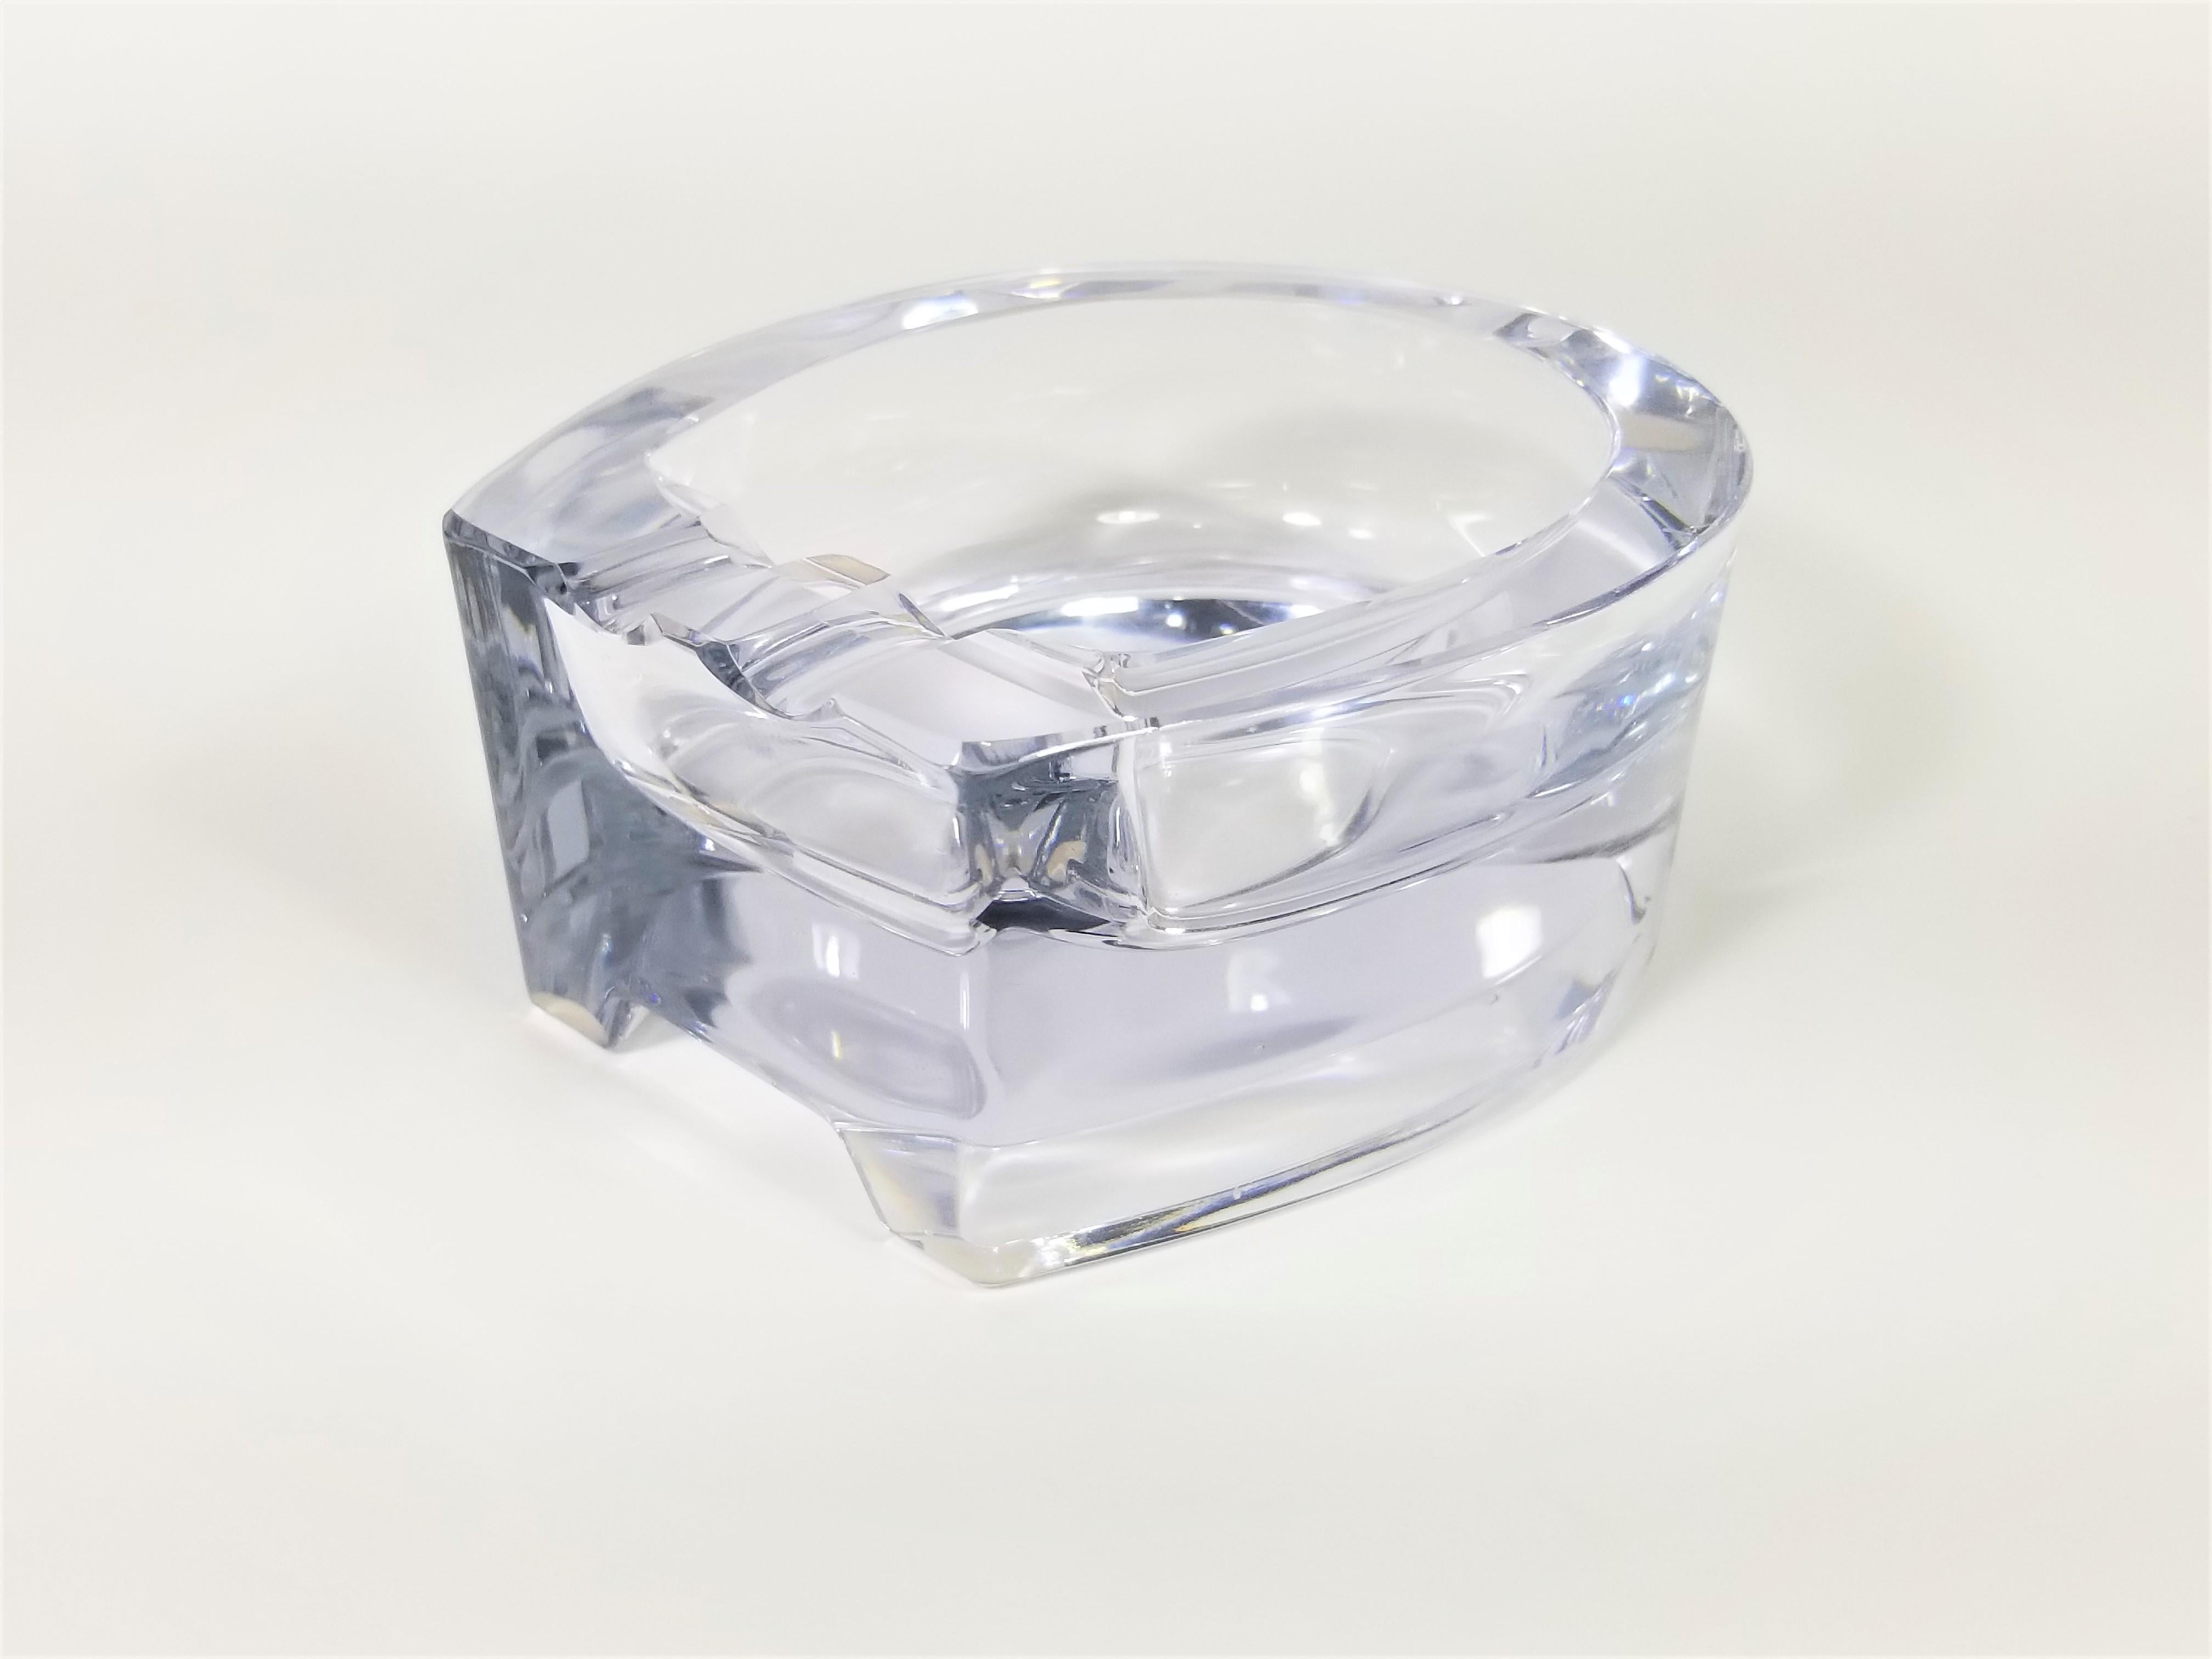 1970s 1980s French Crystal Ashtray in the design of a Horseshoe. Heavy Sturdy Weight. Still Retains original marking stamp. Made in France. 